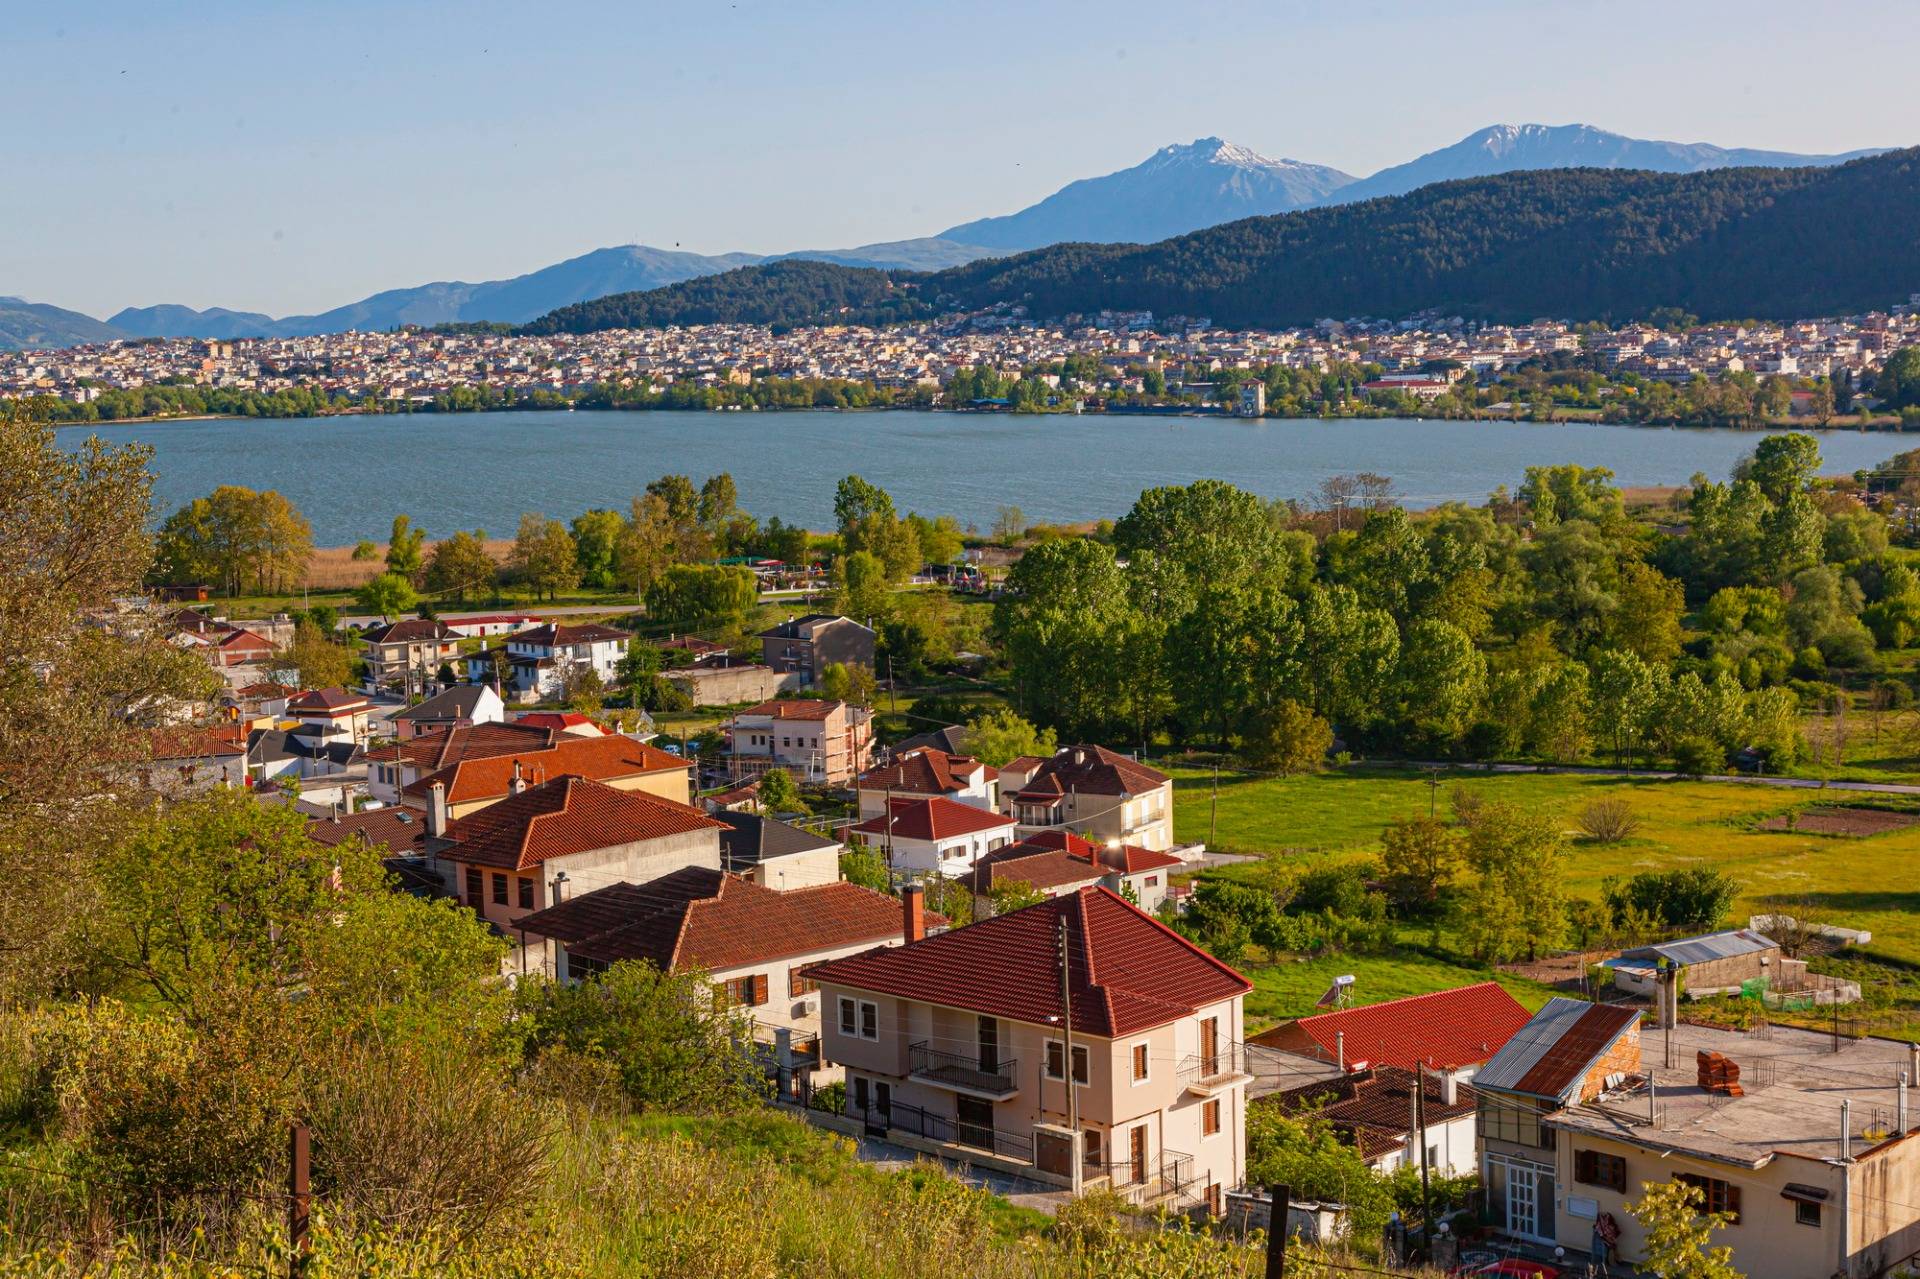 The real Greece. The city of Ioannina.